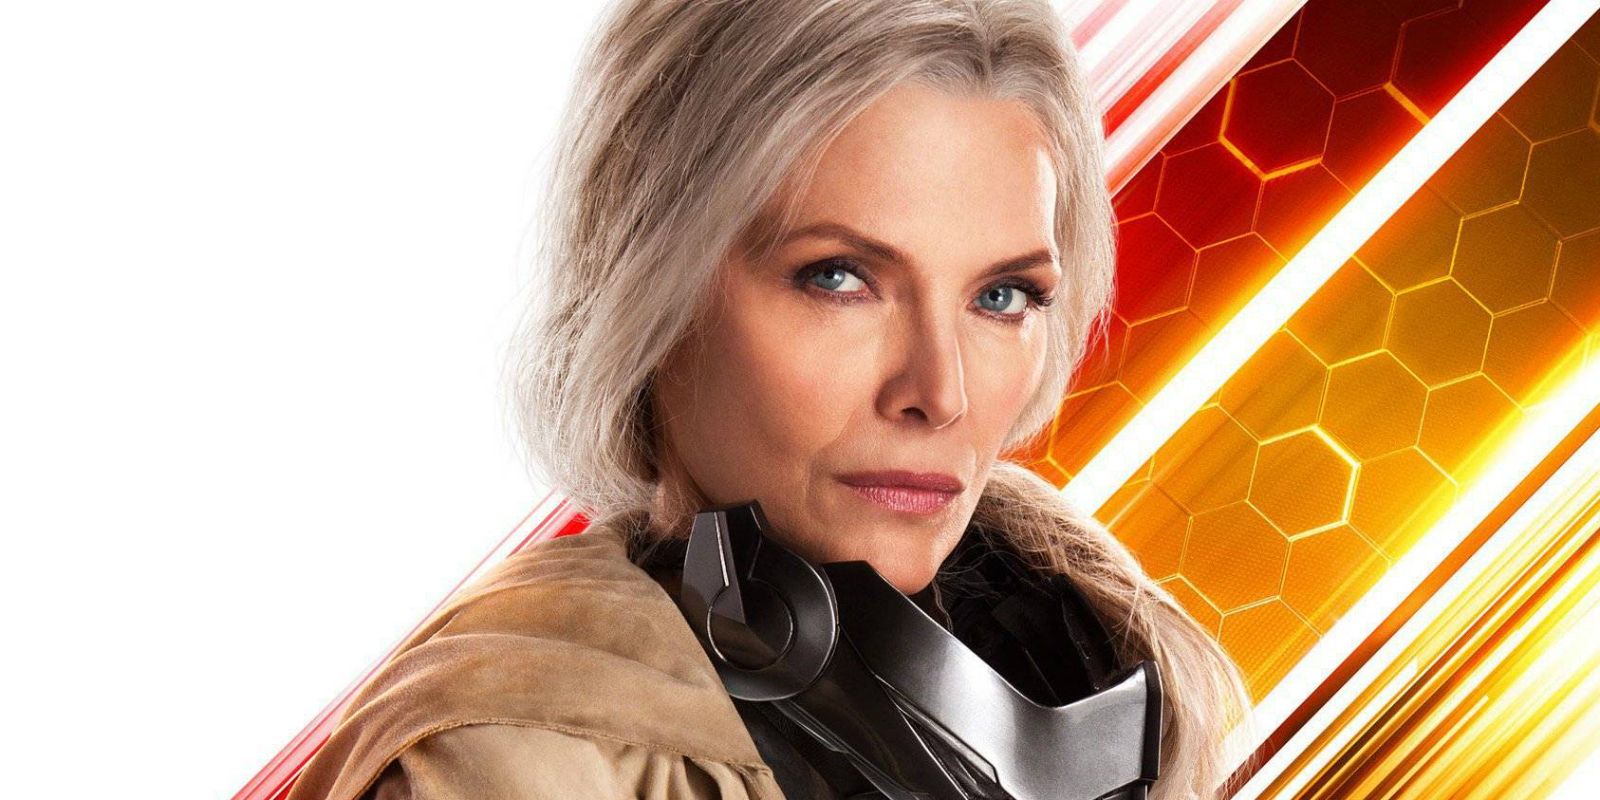 Michelle Pfeiffer as Janet van Dyne in an Ant-Man 2 poster.